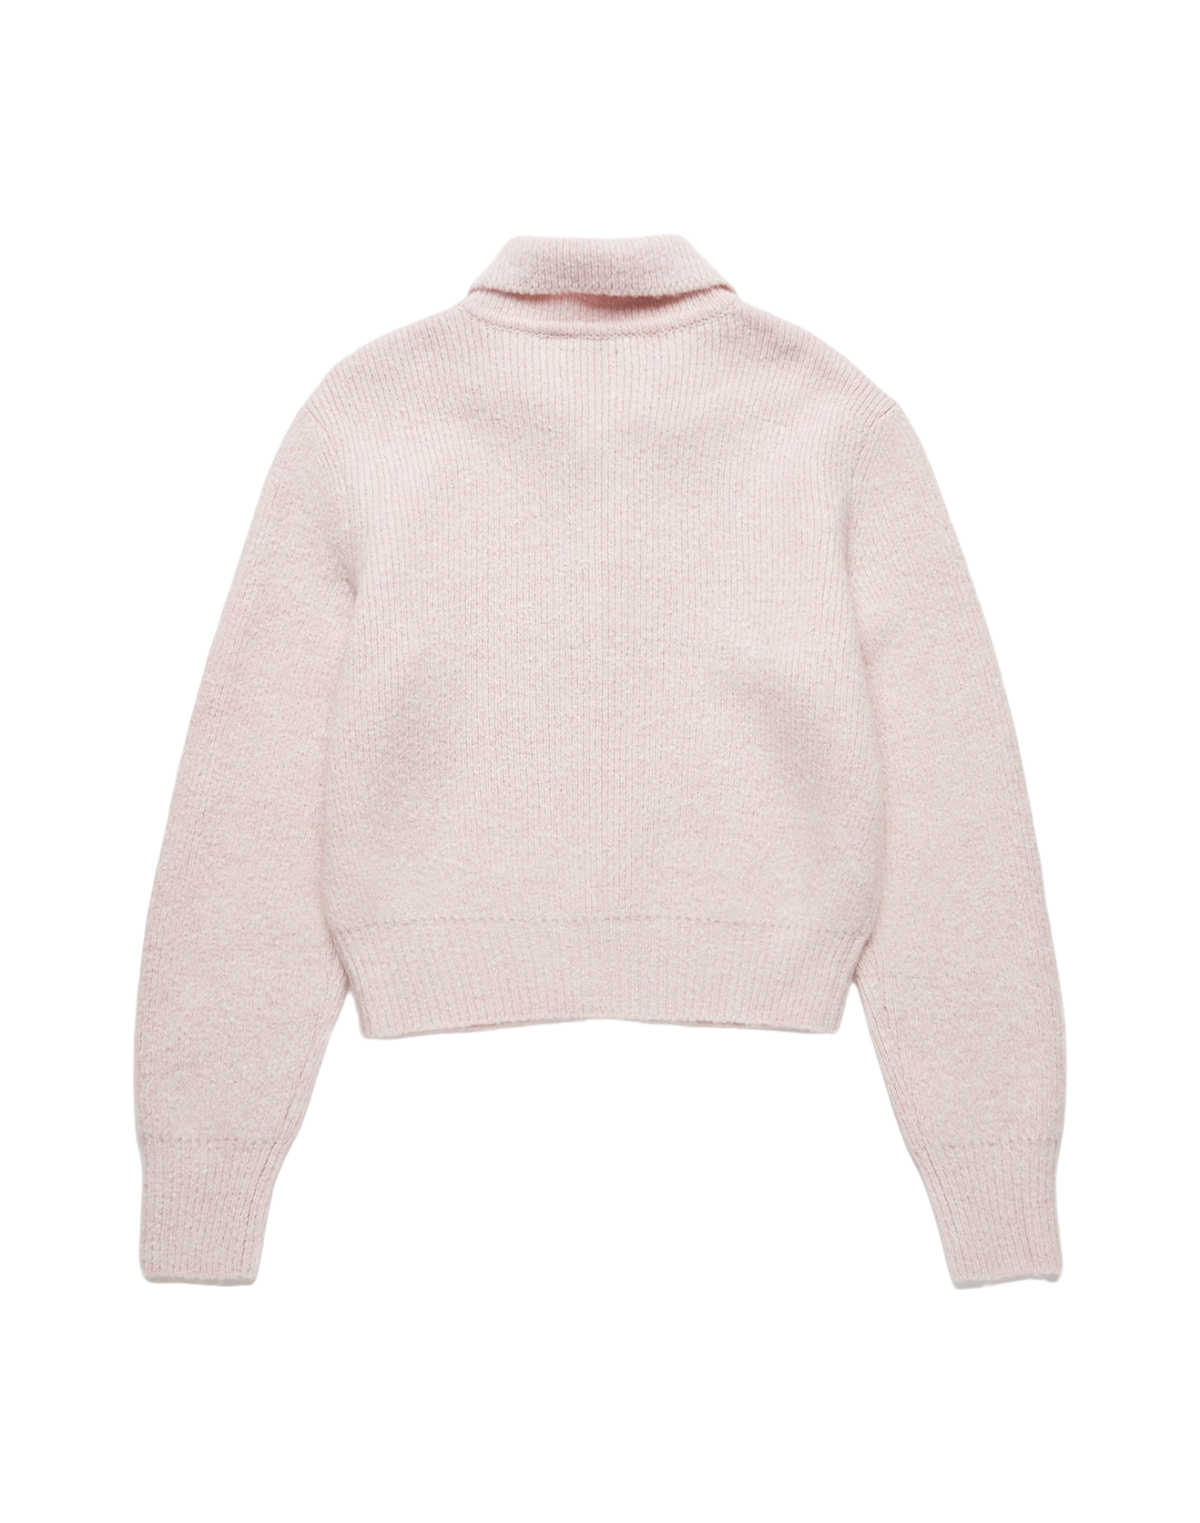 Unisex Open Collar Boucle Knit Cardigan In Soft Pink